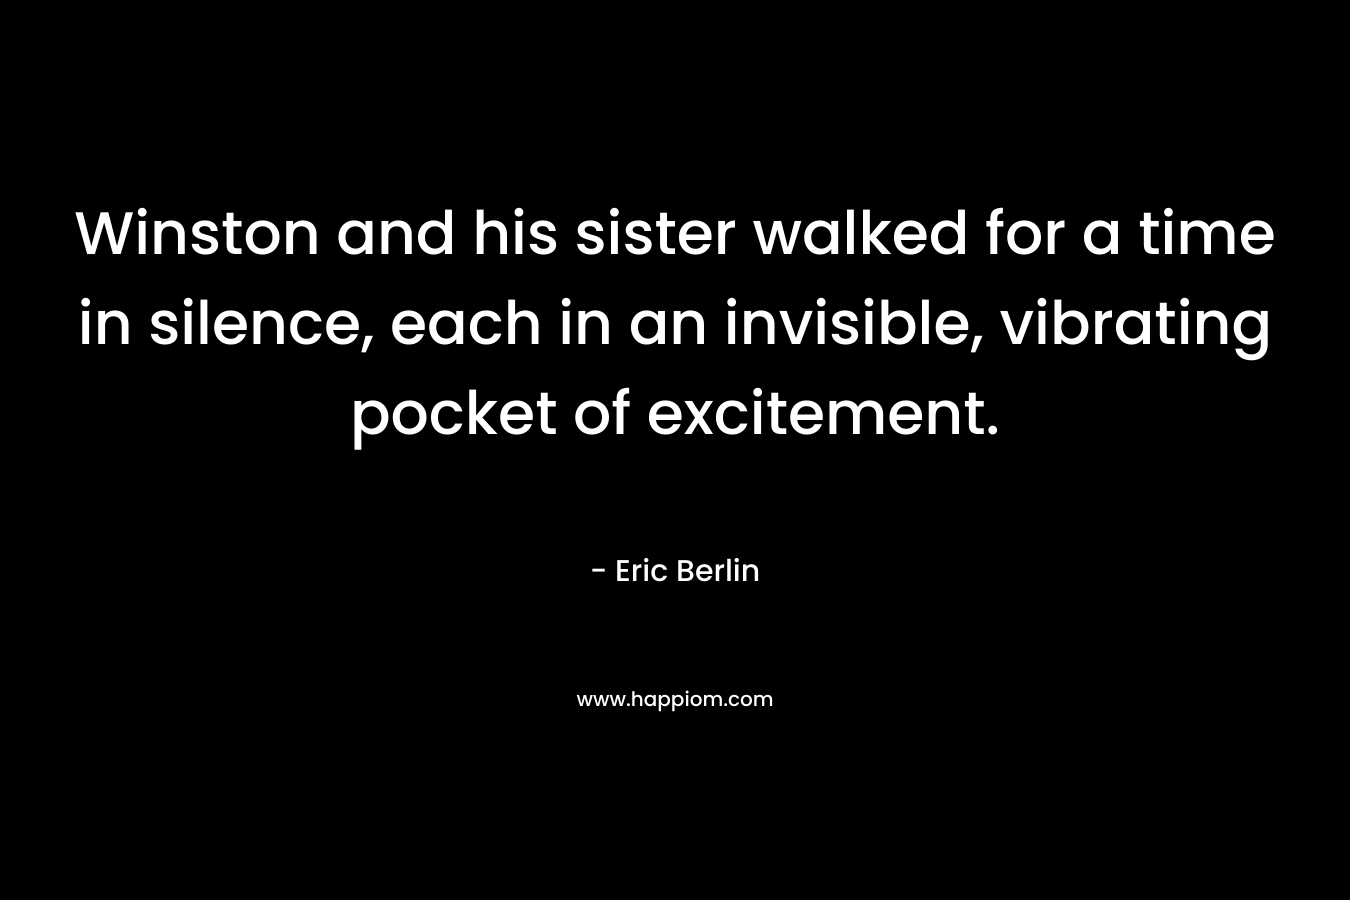 Winston and his sister walked for a time in silence, each in an invisible, vibrating pocket of excitement.